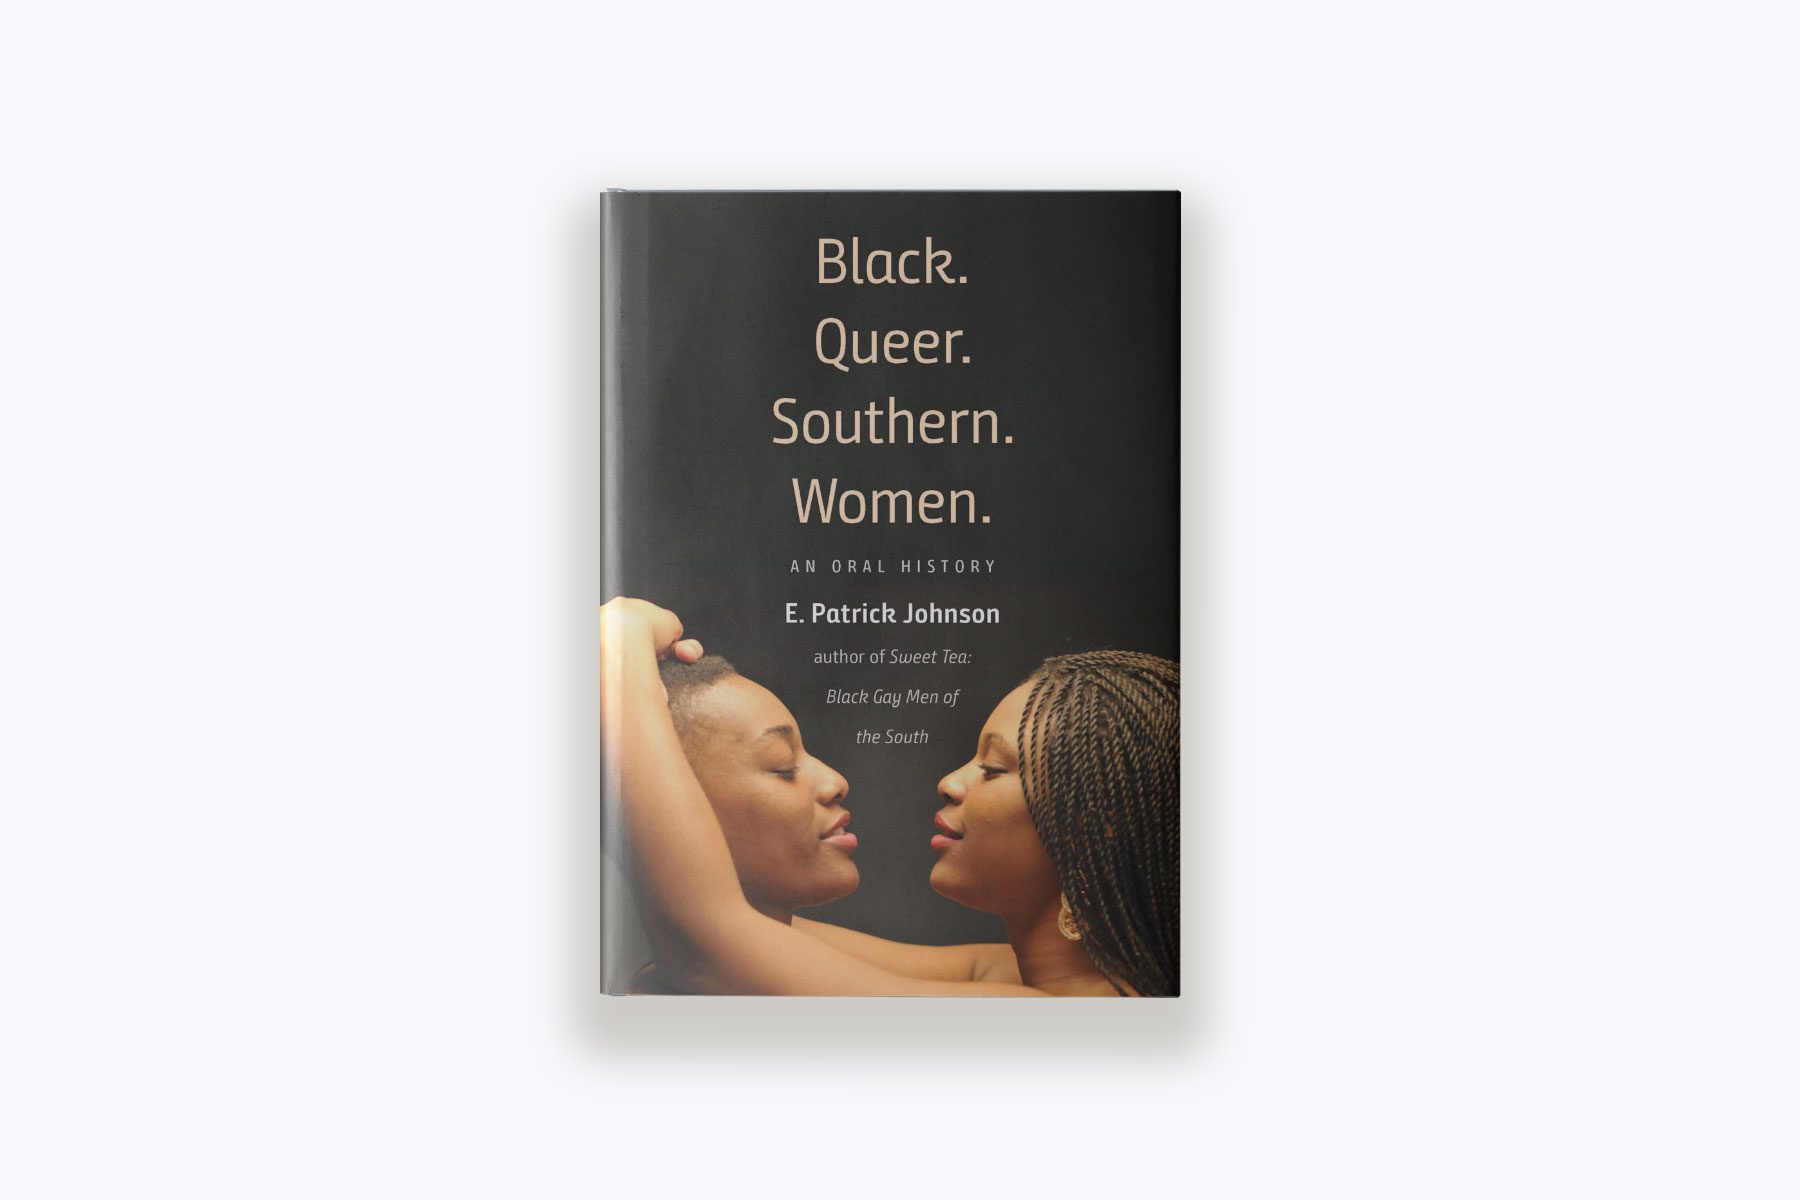 "Black. Queer. Southern. Women." by E. Patrick Johnson